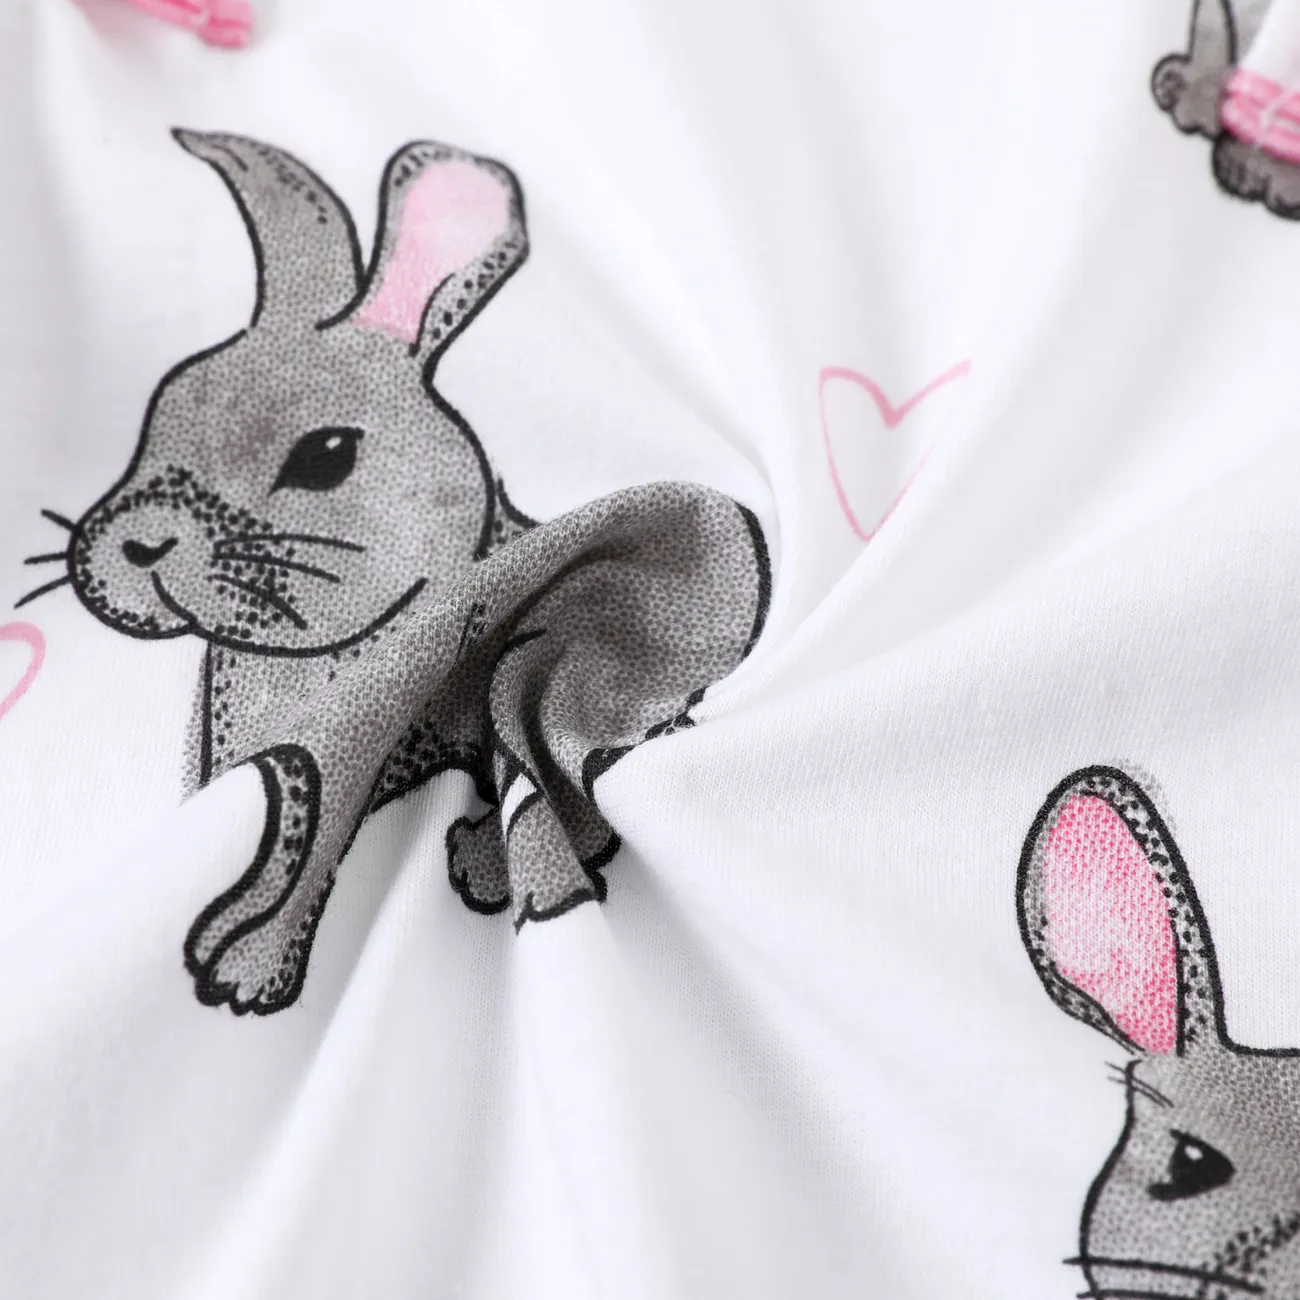 100% Cotton Rabbit Print Footed/footie Long-sleeve Baby Jumpsuit White big image 1